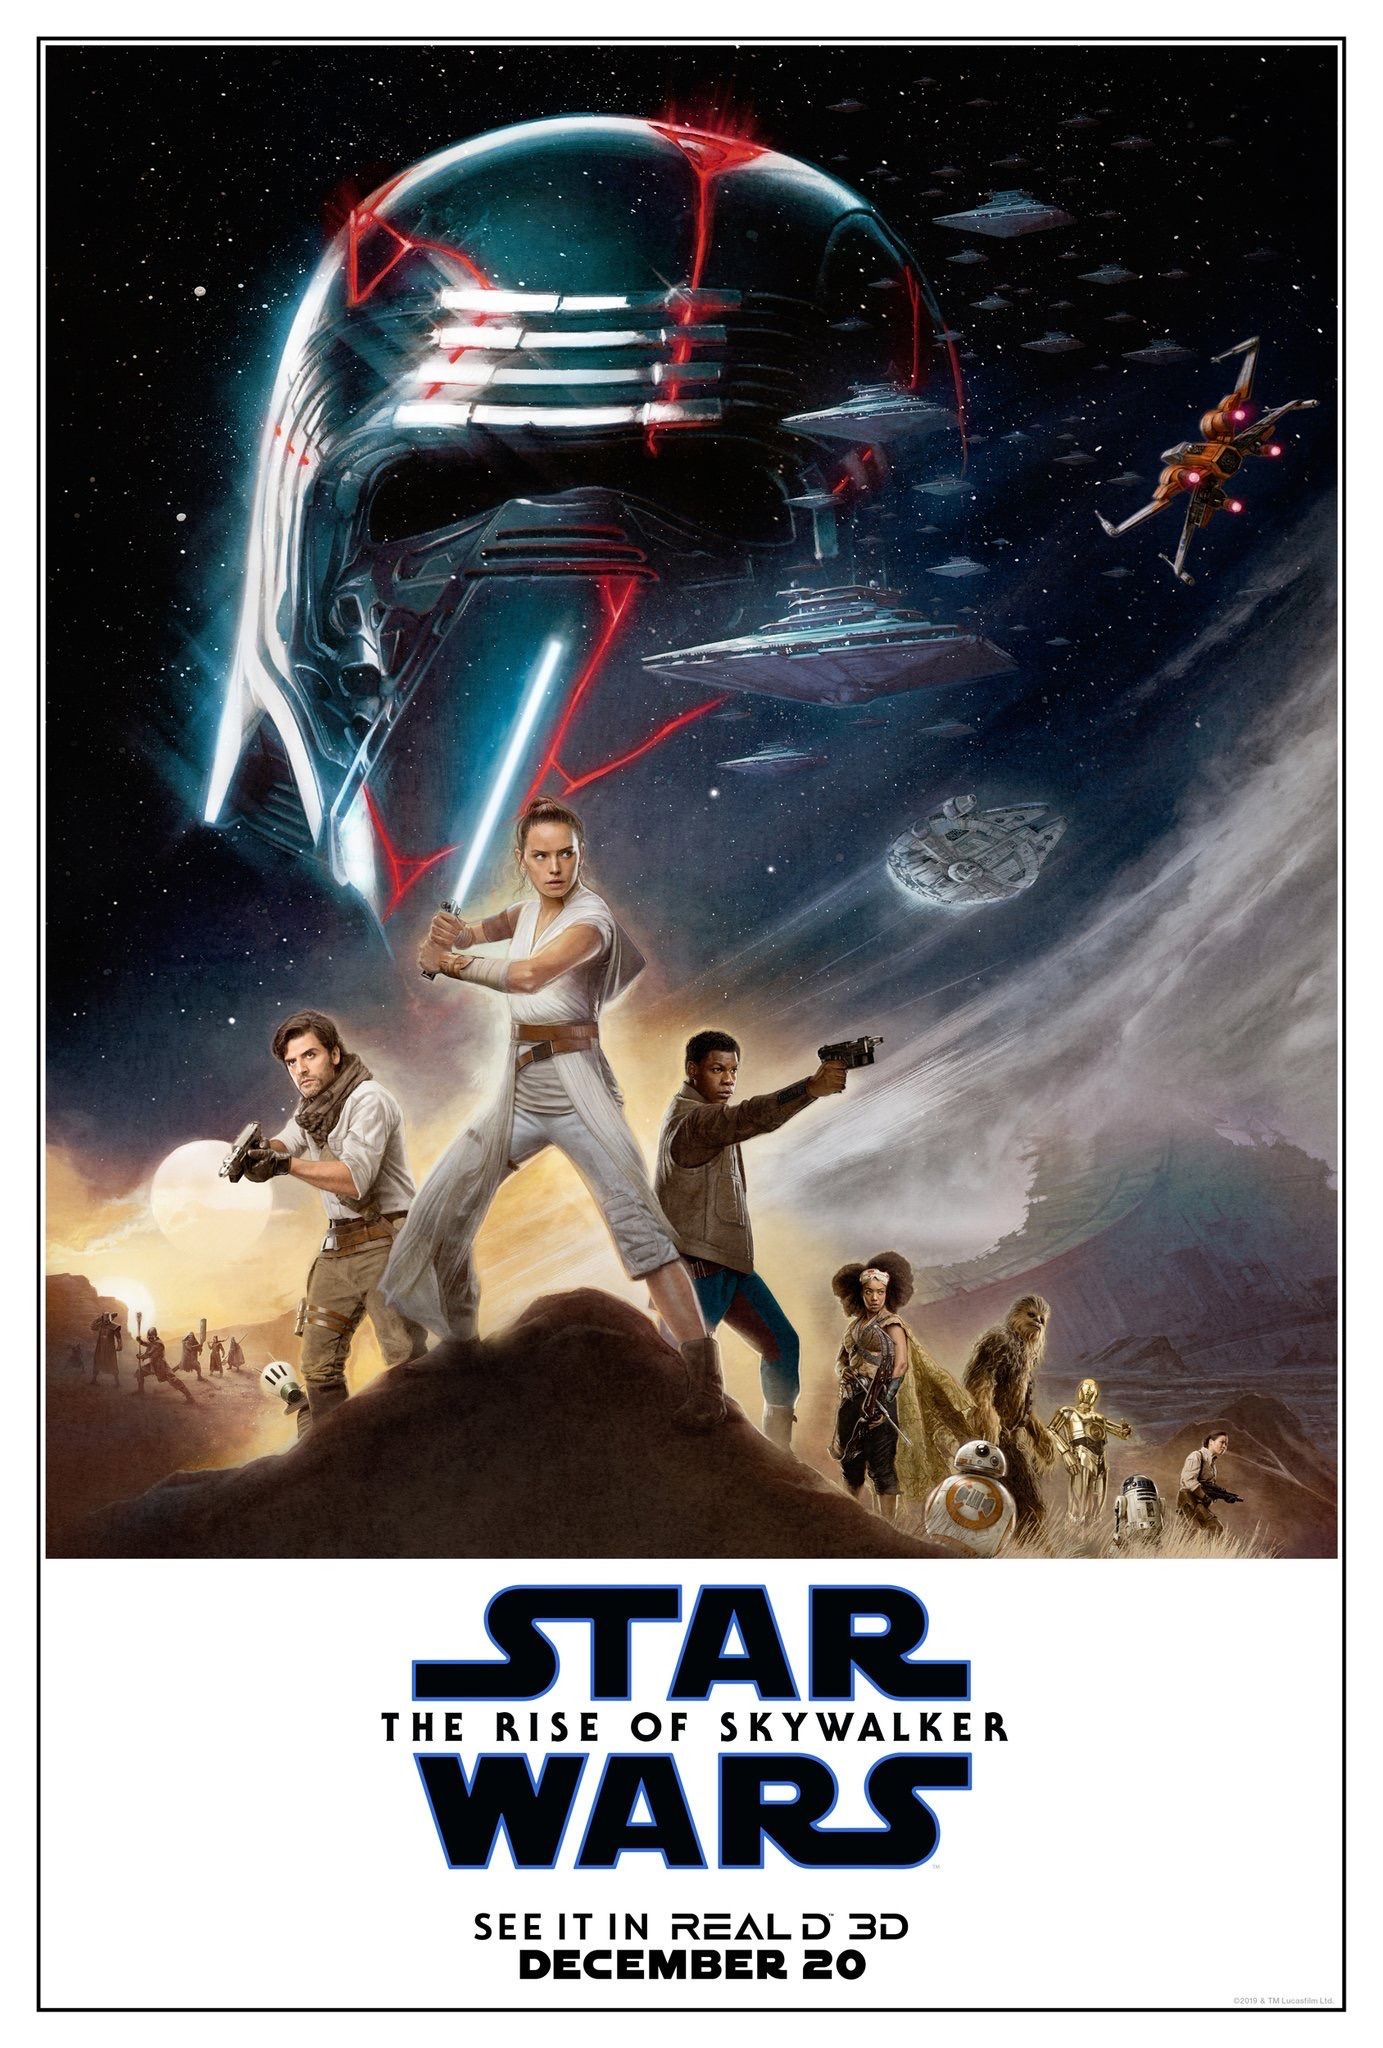 The Rise of Skywalker RealD 3D poster